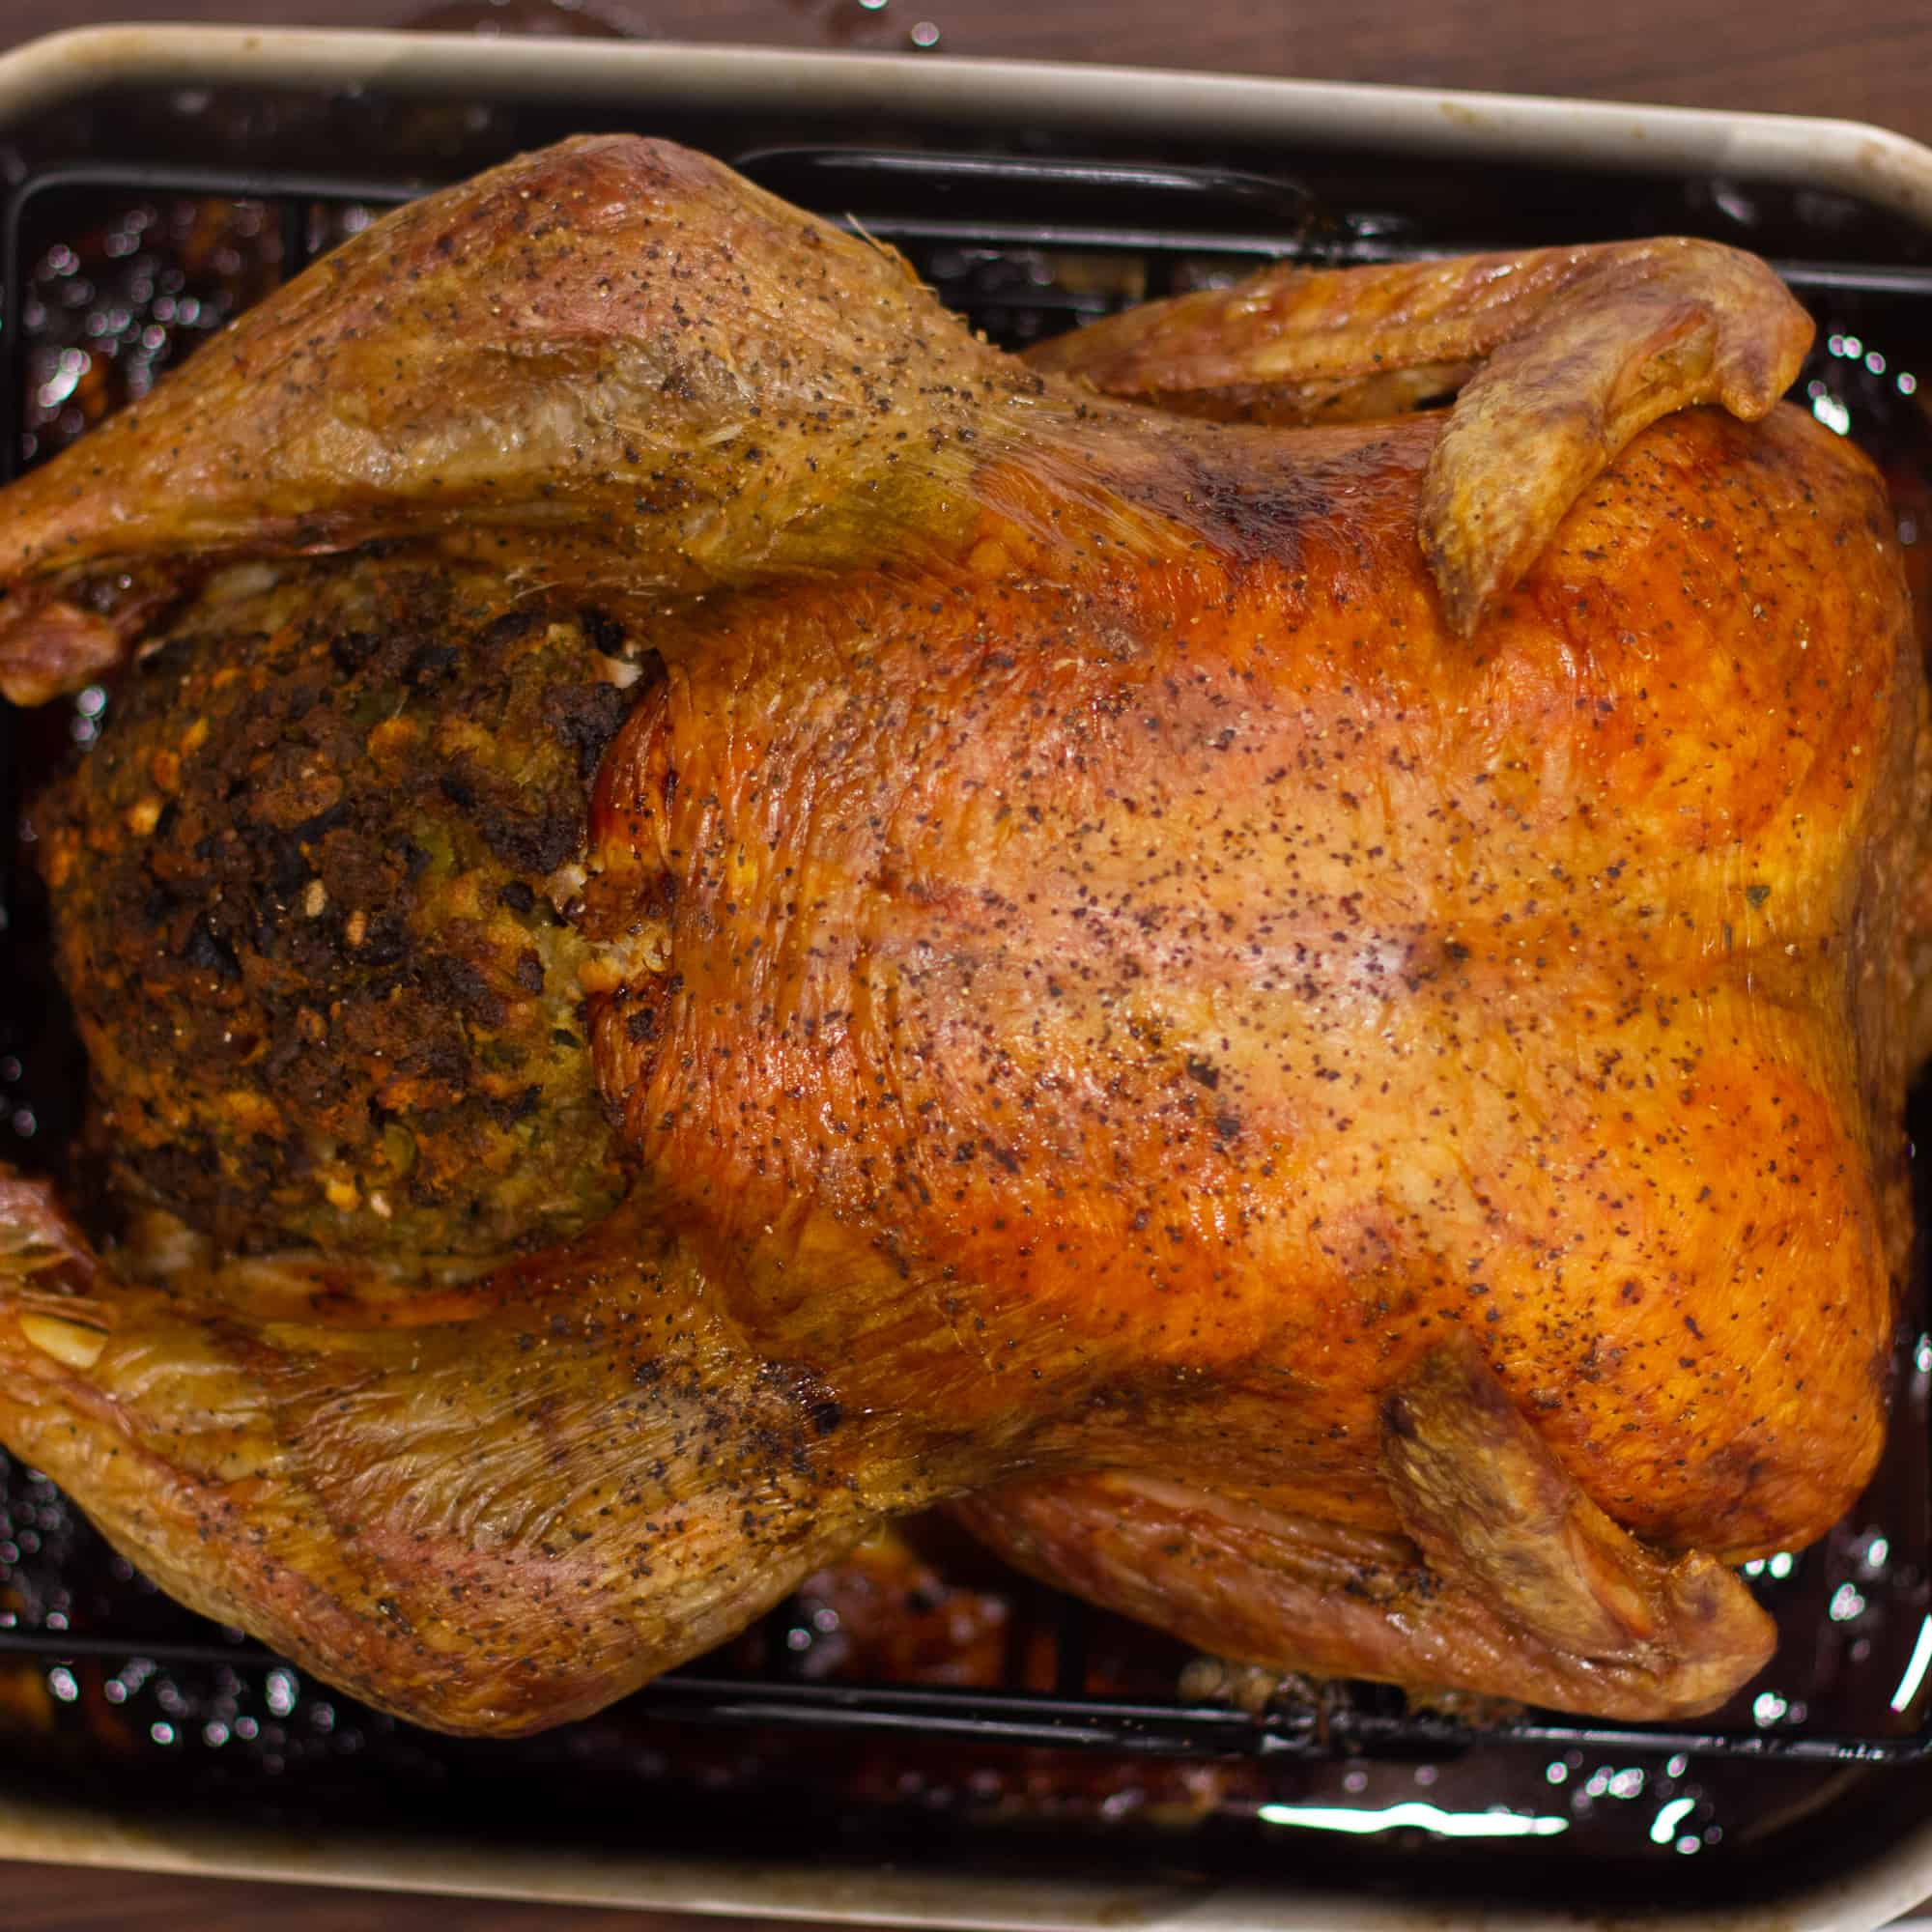 Roast the turkey until cooked. Let rest for 10 minutes.